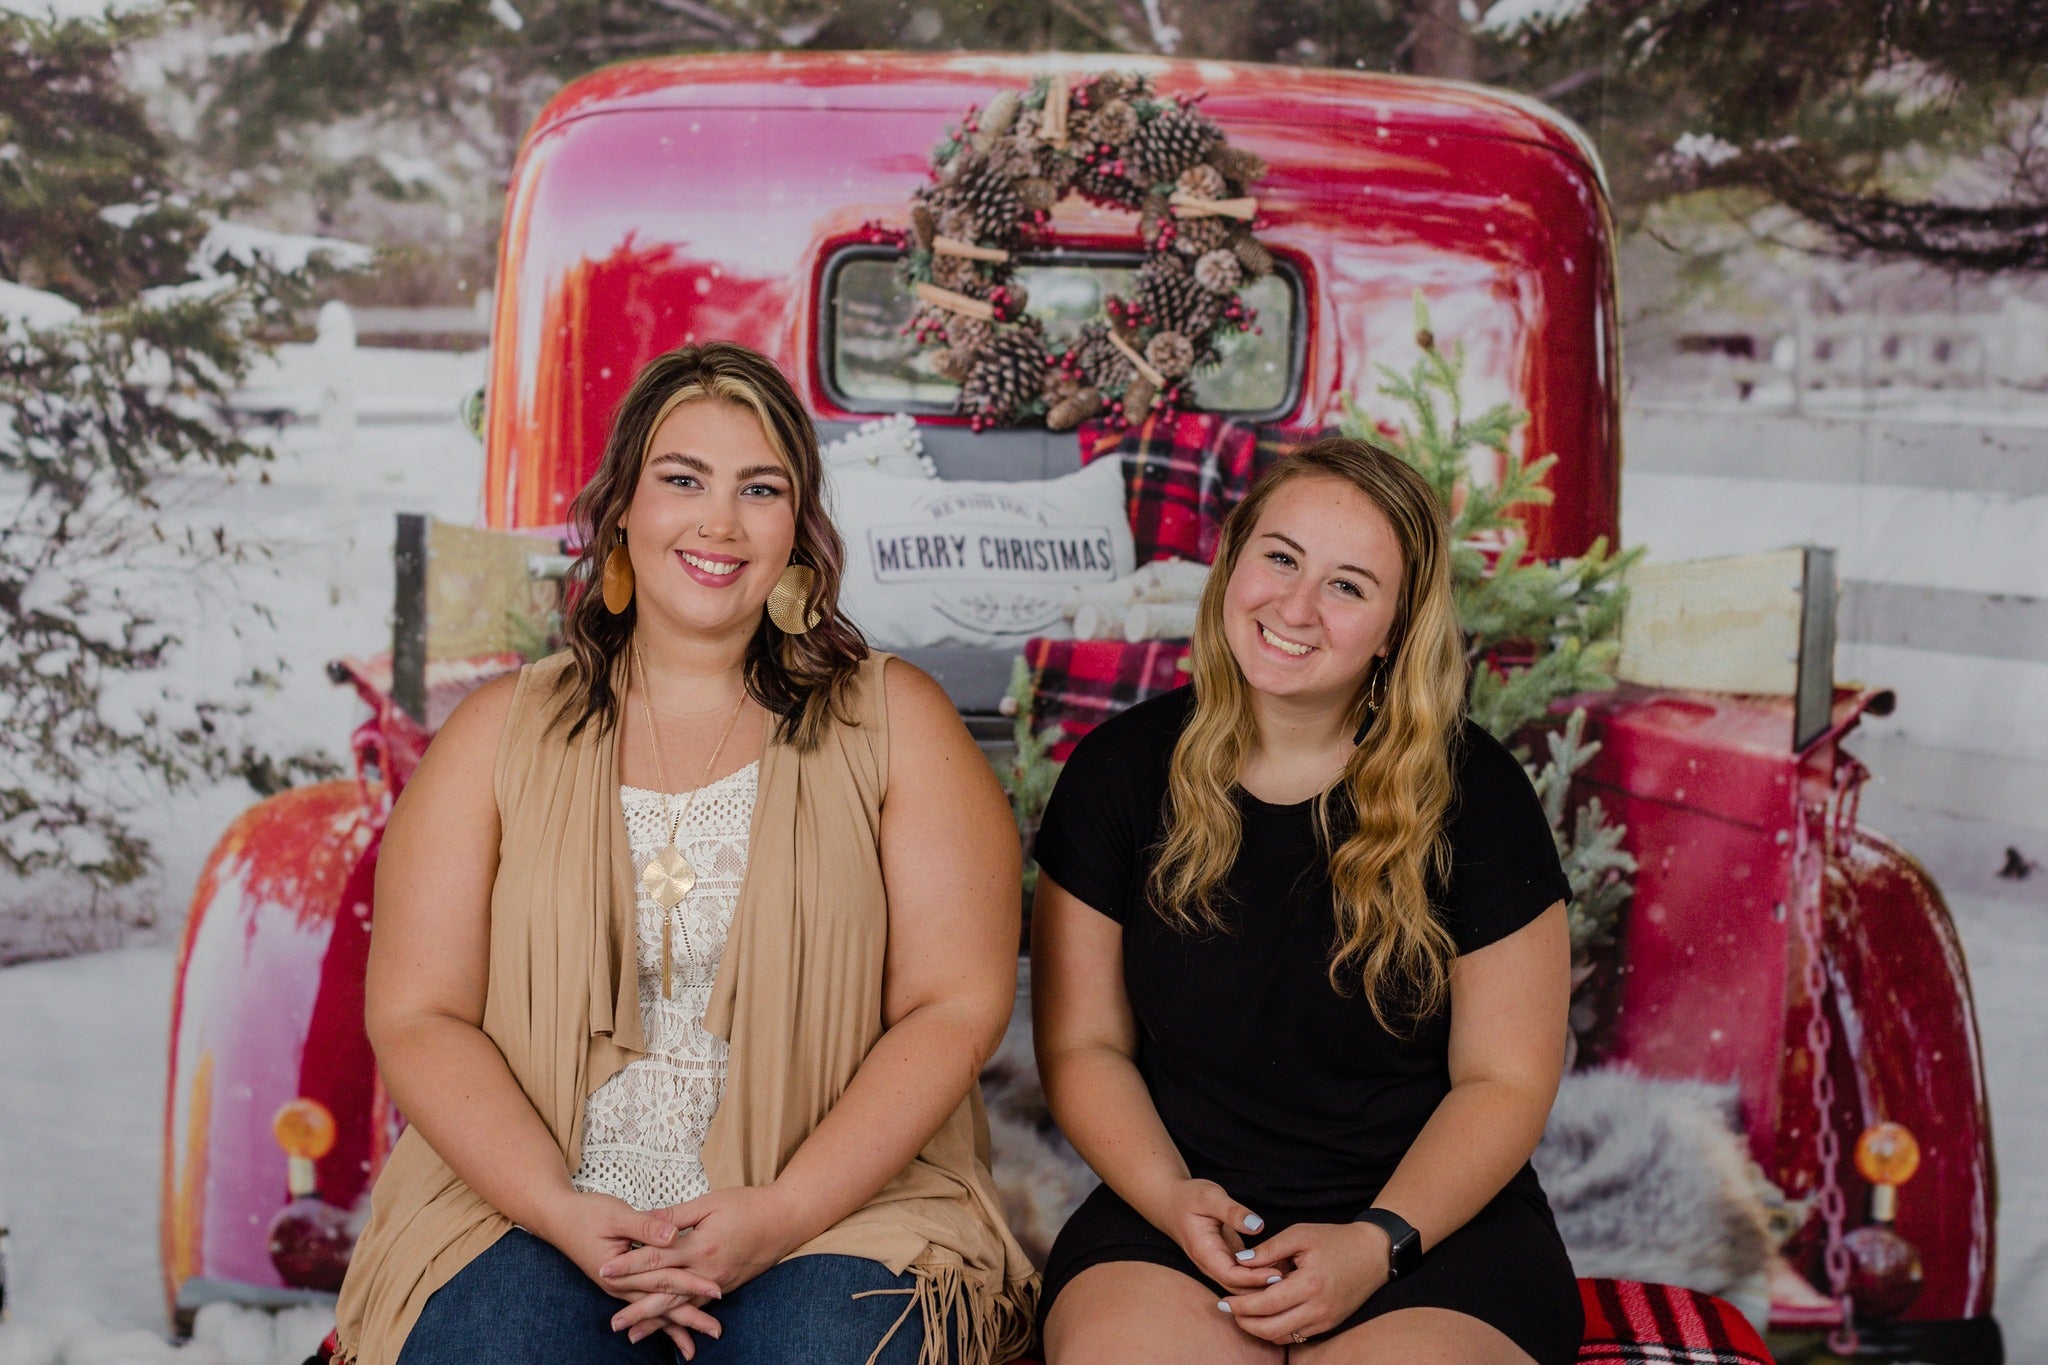 Kate Red Christmas Truck in Snow Backdrop Designed by Mandy Ringe Photography